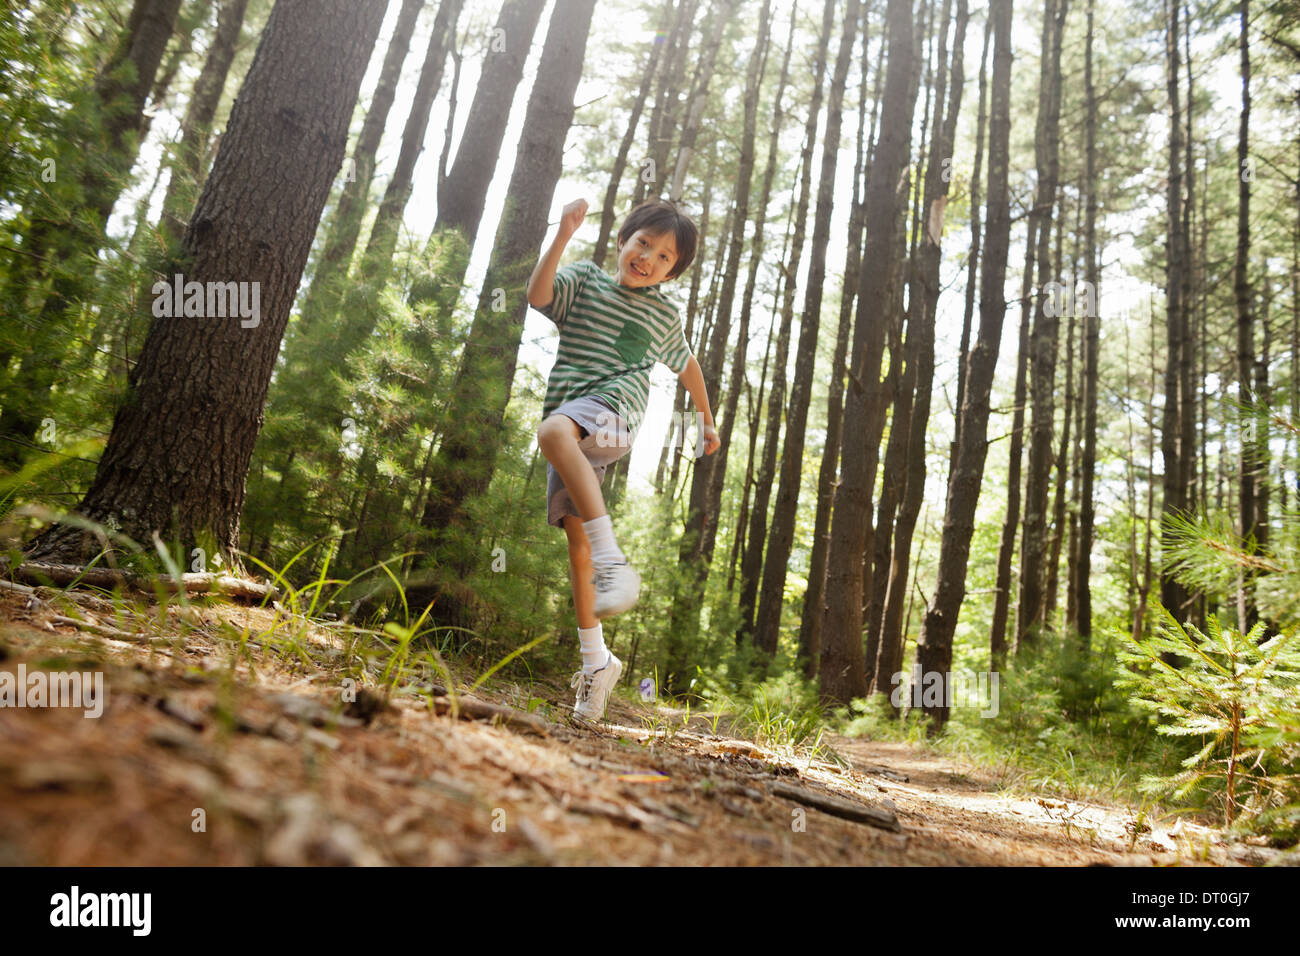 Woodstock New York USA young boy playing in the pine forest tree trunks Stock Photo